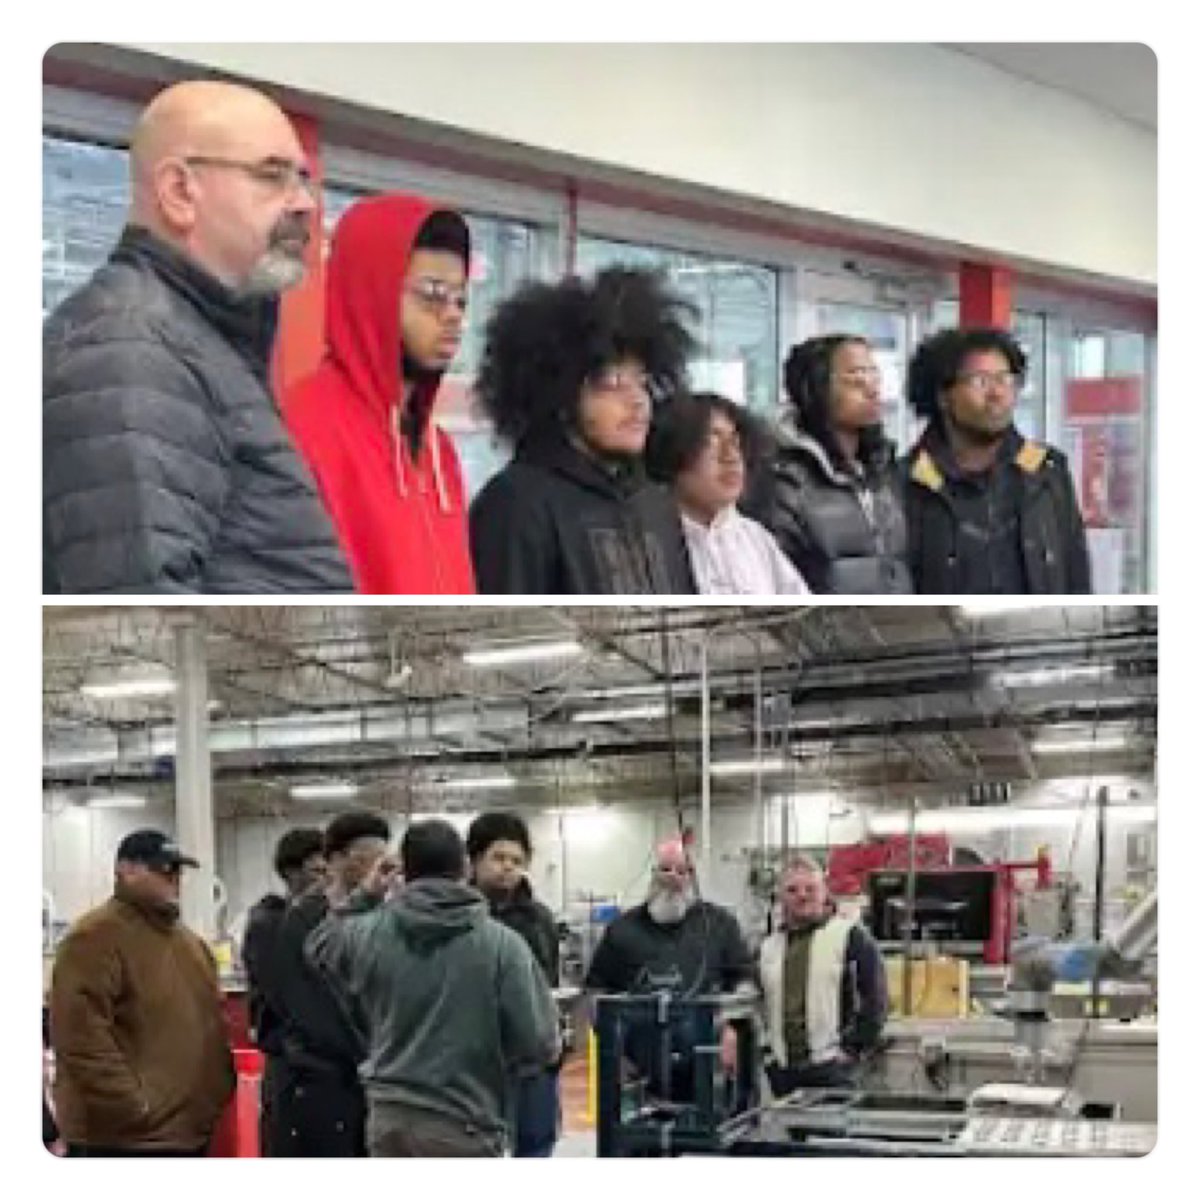 Thrilled to share that MP's Metal Fabrication and Joining Technologies students visited AccuRound and gained valuable insights into precision manufacturing. #metalfabrication AccuRound #PrecisionManufacturing #StudentExperience #BPS